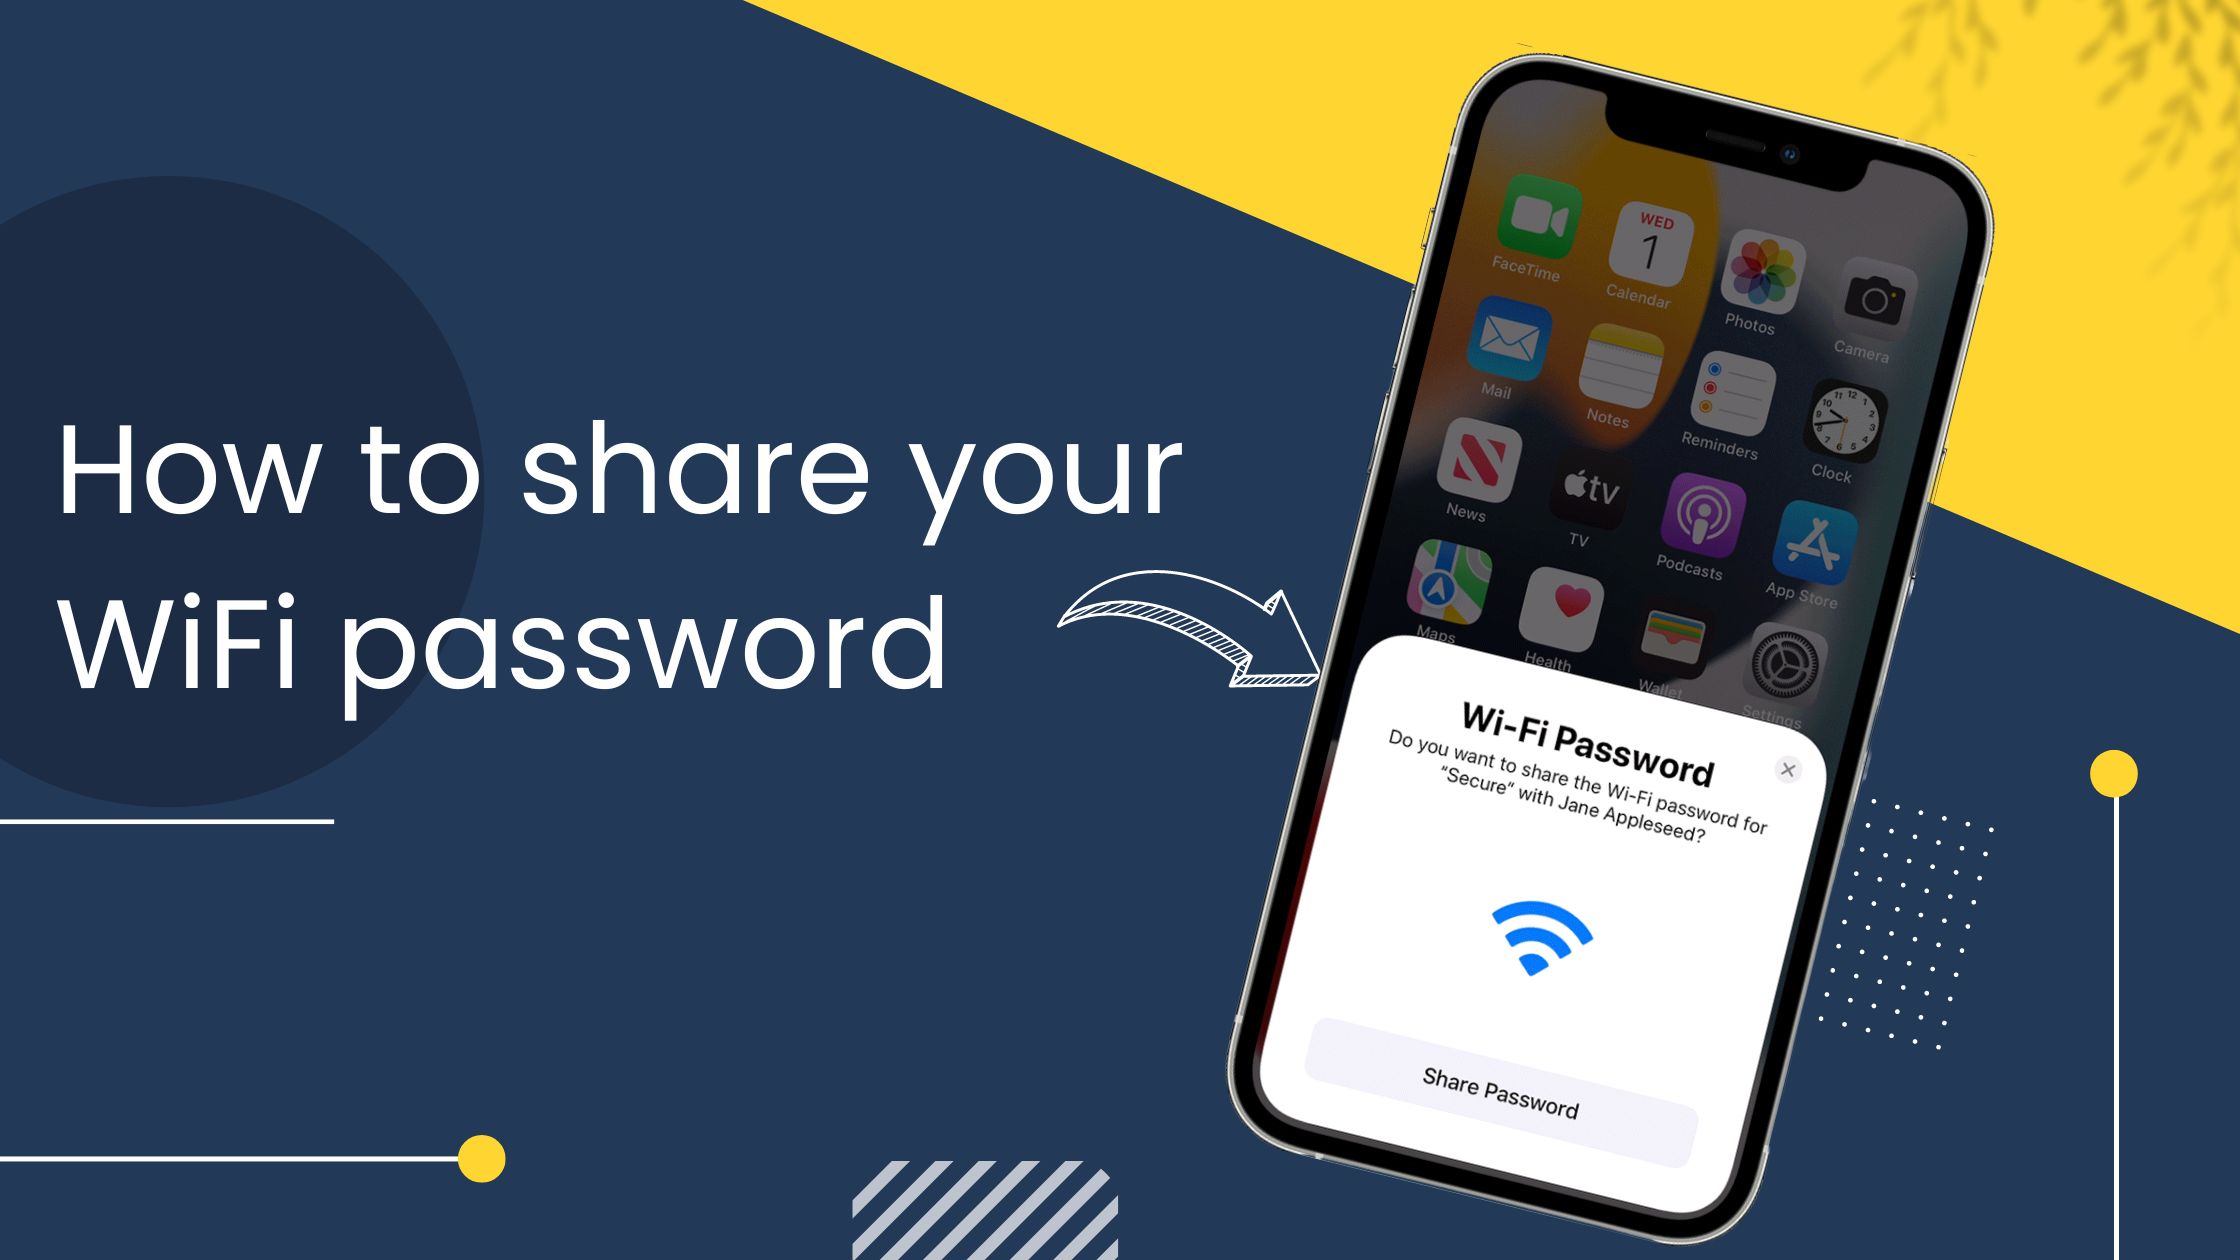 How to share your WiFi password on an iPhone & Pixel / Android